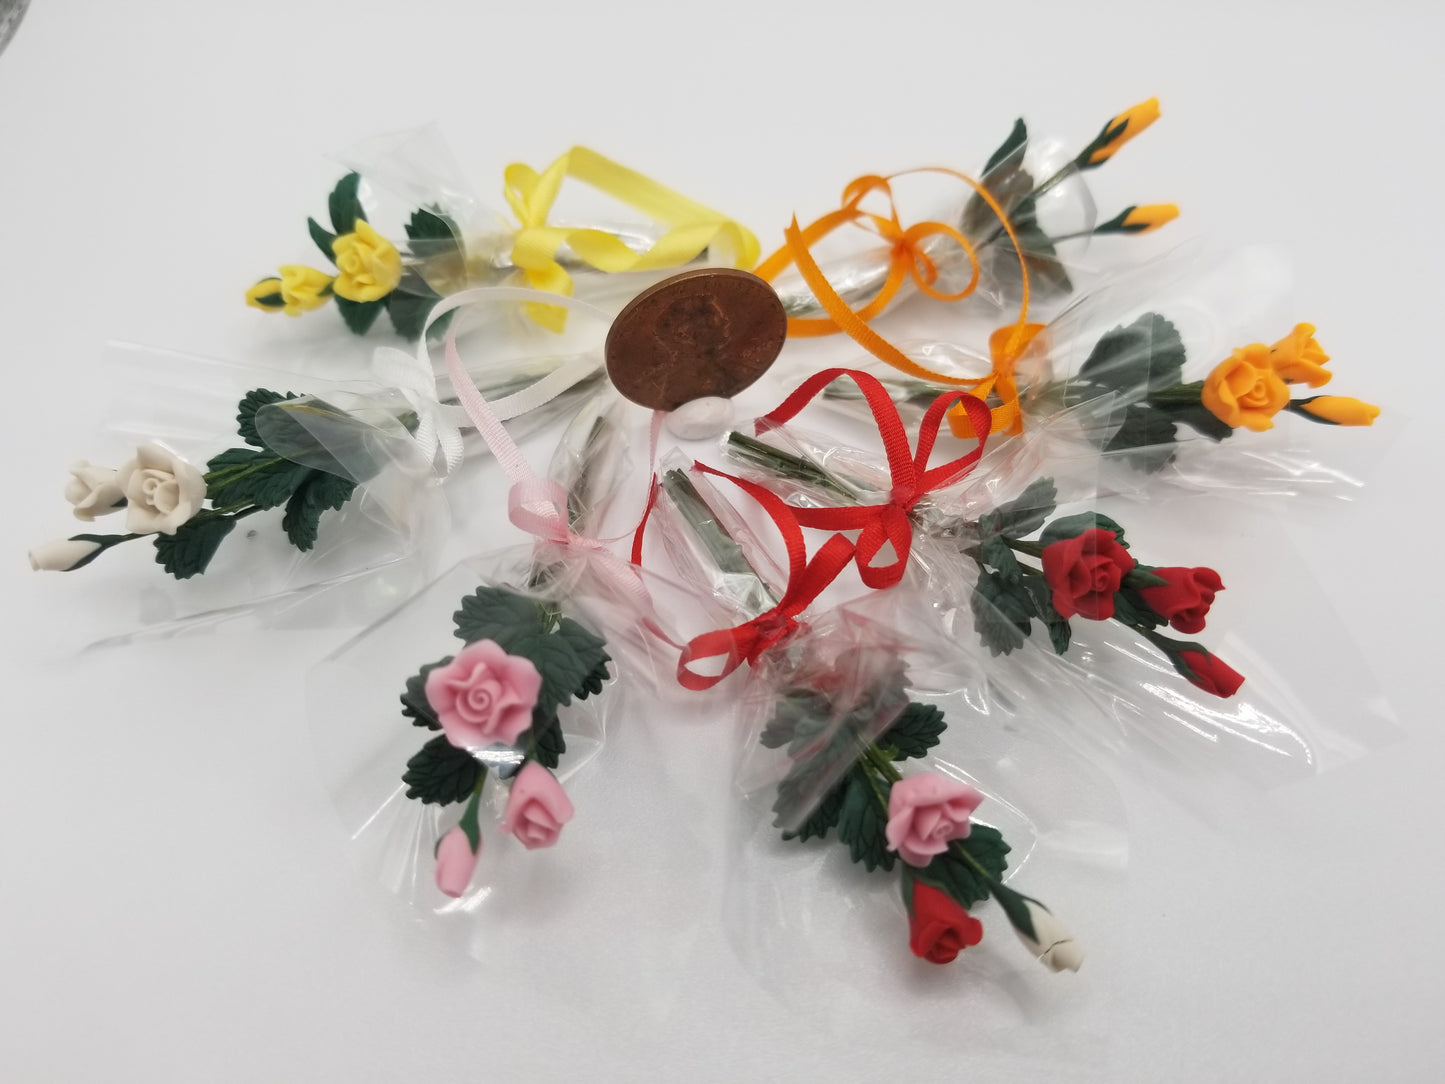 miniature dollhouse 3 clay roses wrapped in cellophane with matching bow. One inch scale 1:!2